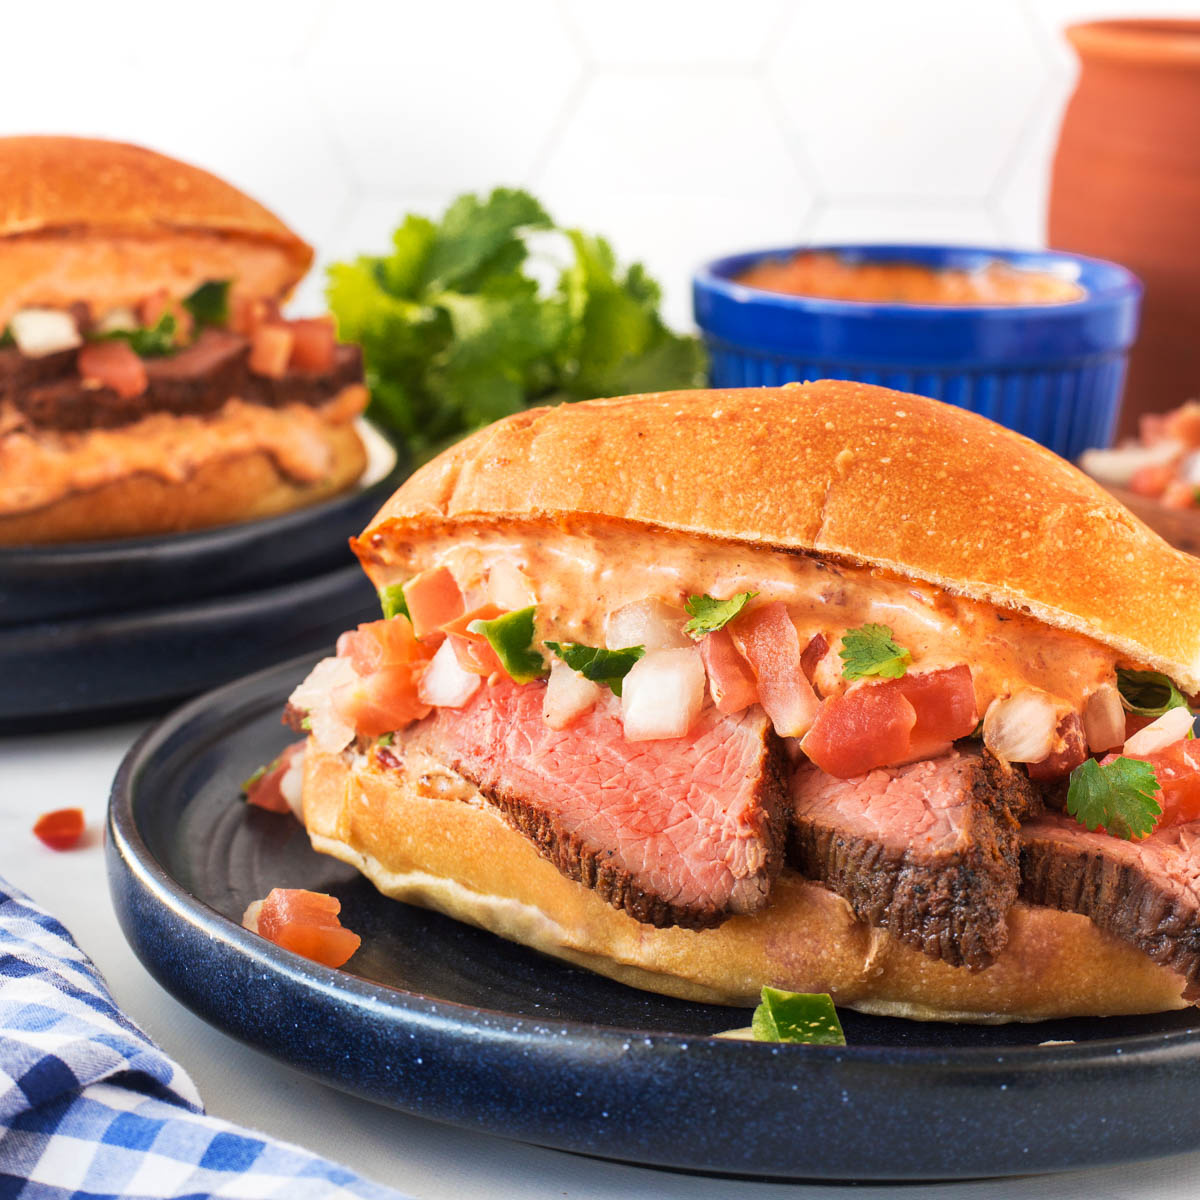 Grilled tri-tip sandwich on a black plate with pico de gallo and chipotle mayo.